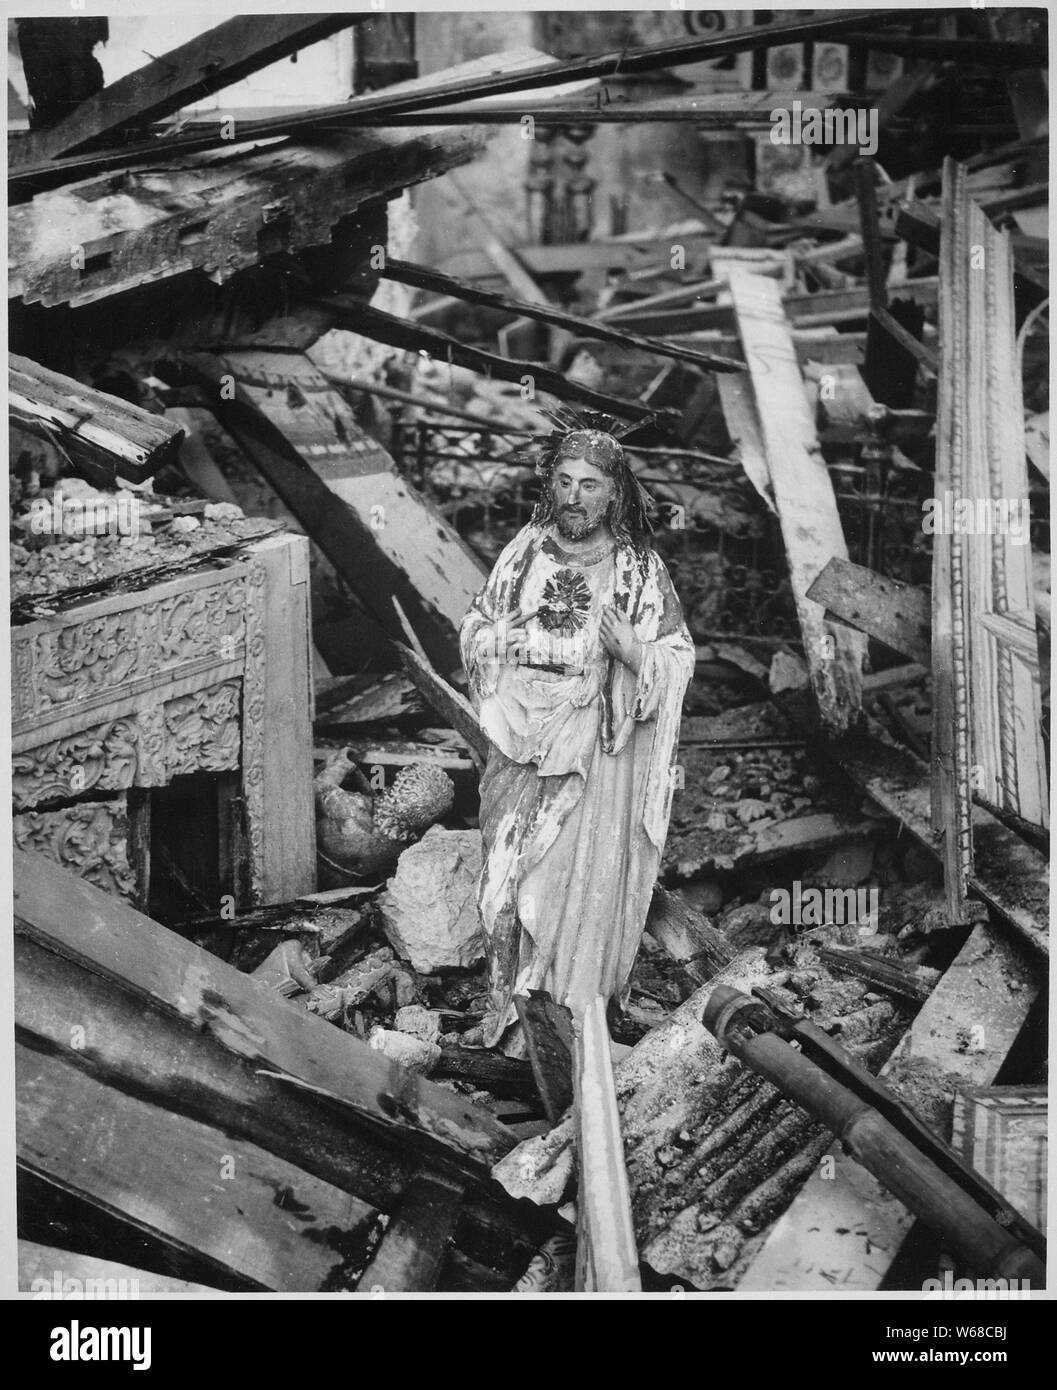 Still standing in the rubble of a church in the war-blasted town of Dulag, a statue of the sacred heart appears to gaze in quiet sorrow on the destruction wrought by battle's fury seething over Leyte Island. Philippines, 1944.; General notes:  Use War and Conflict Number 1331 when ordering a reproduction or requesting information about this image. Stock Photo